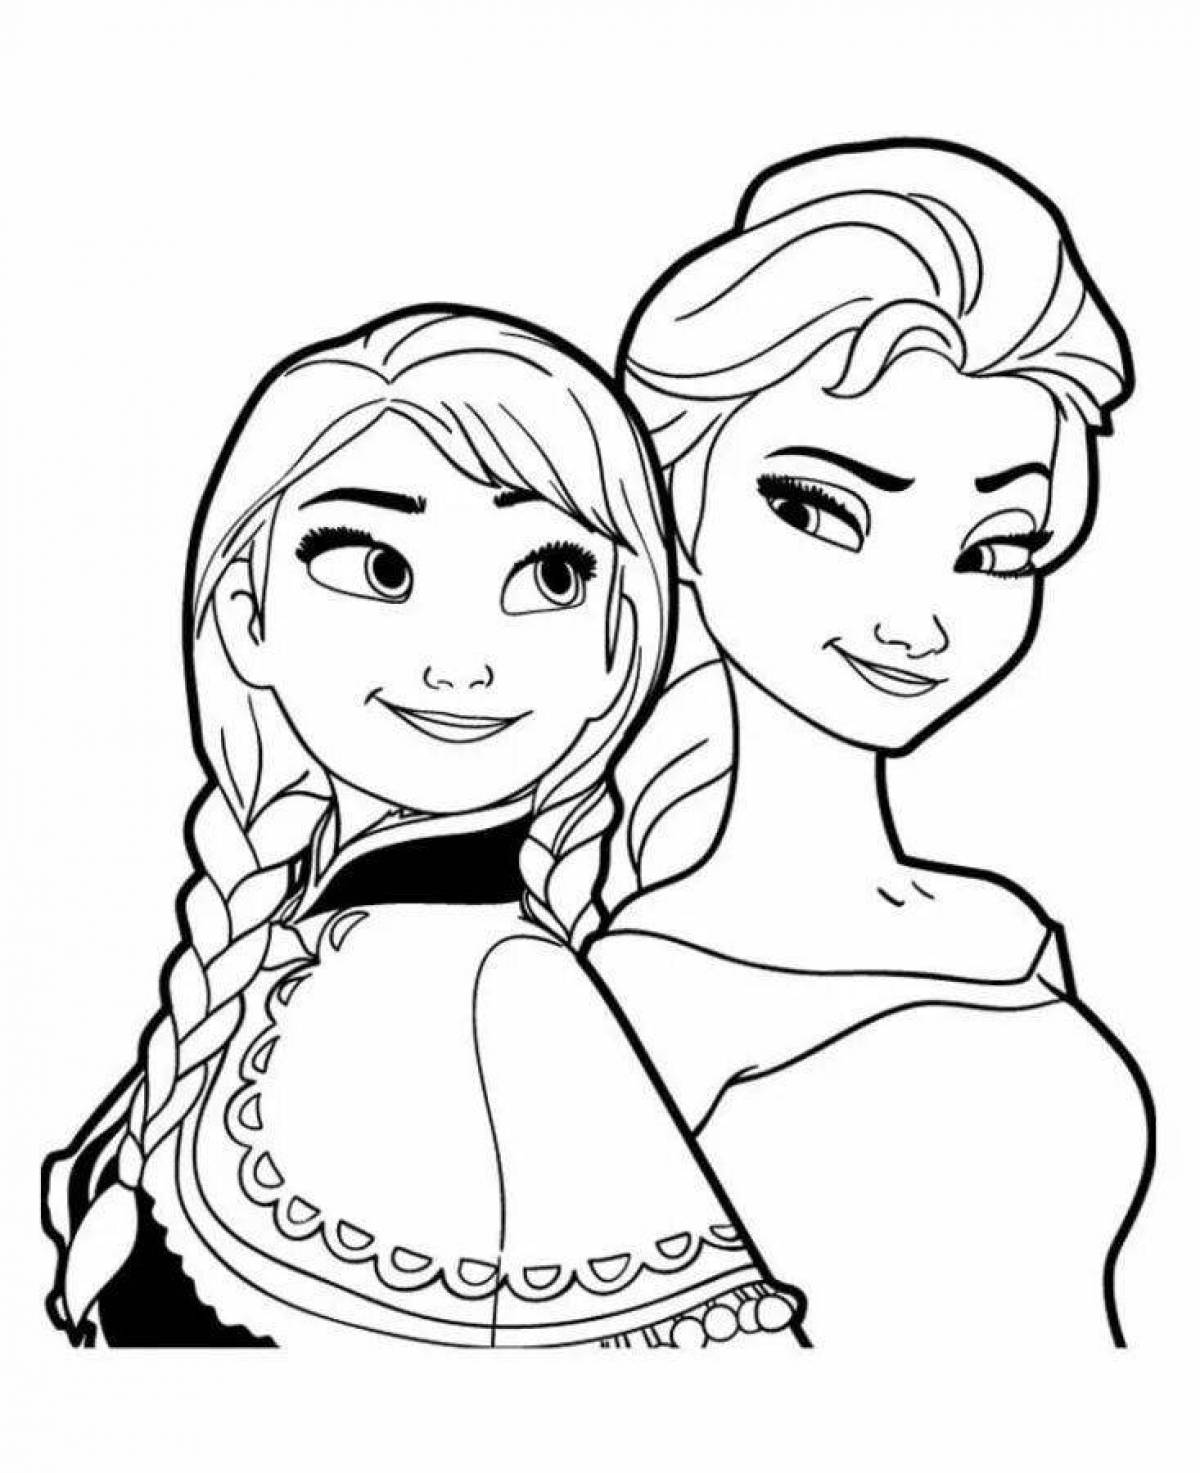 Outstanding coloring elsa and anna